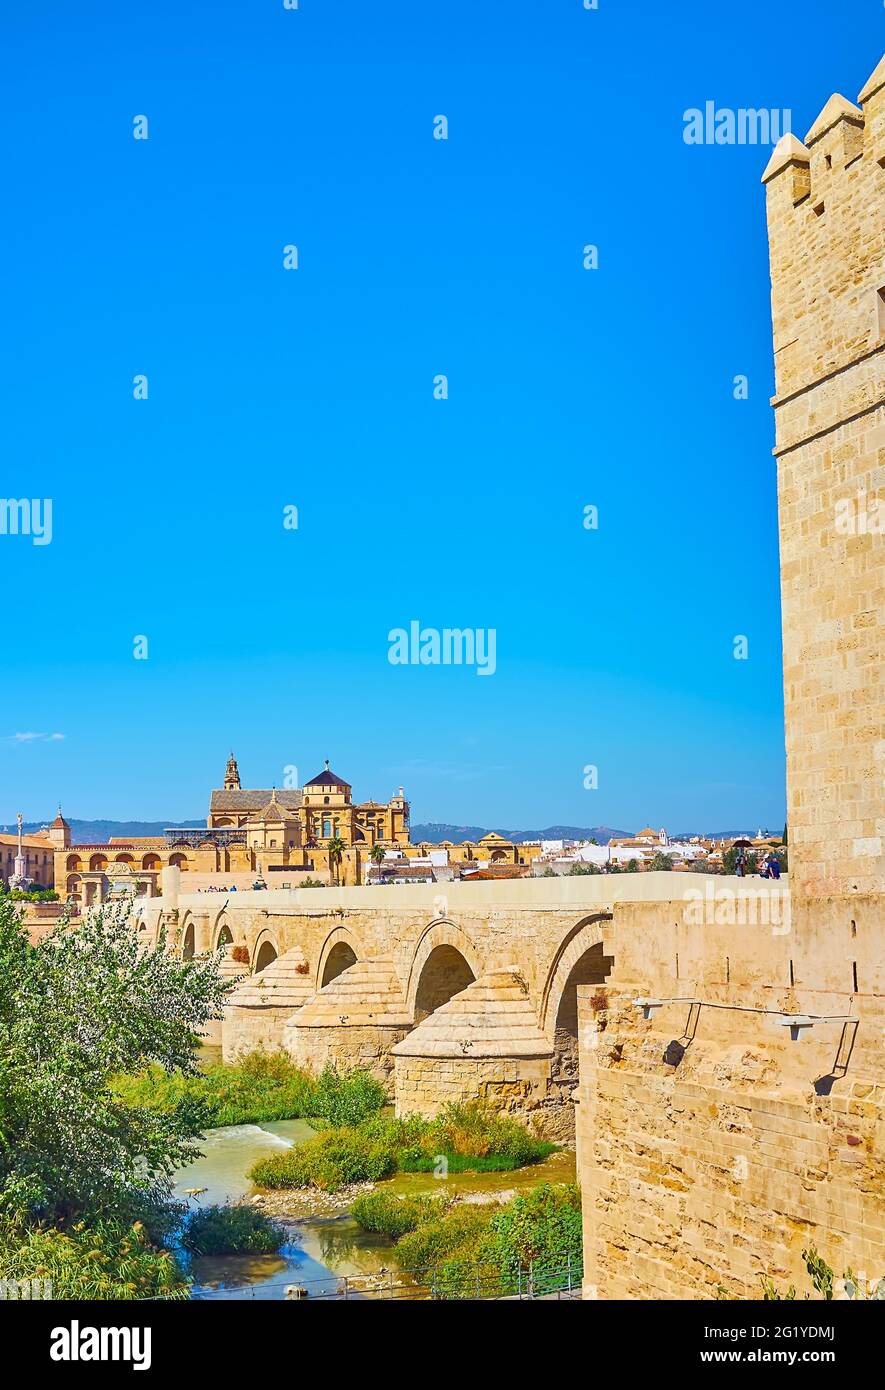 The view on the ancient stone Roman Bridge and monumental building of Mezquita-Catedral (Mosque-Cathedral) in the background, Cordoba, Spain Stock Photo